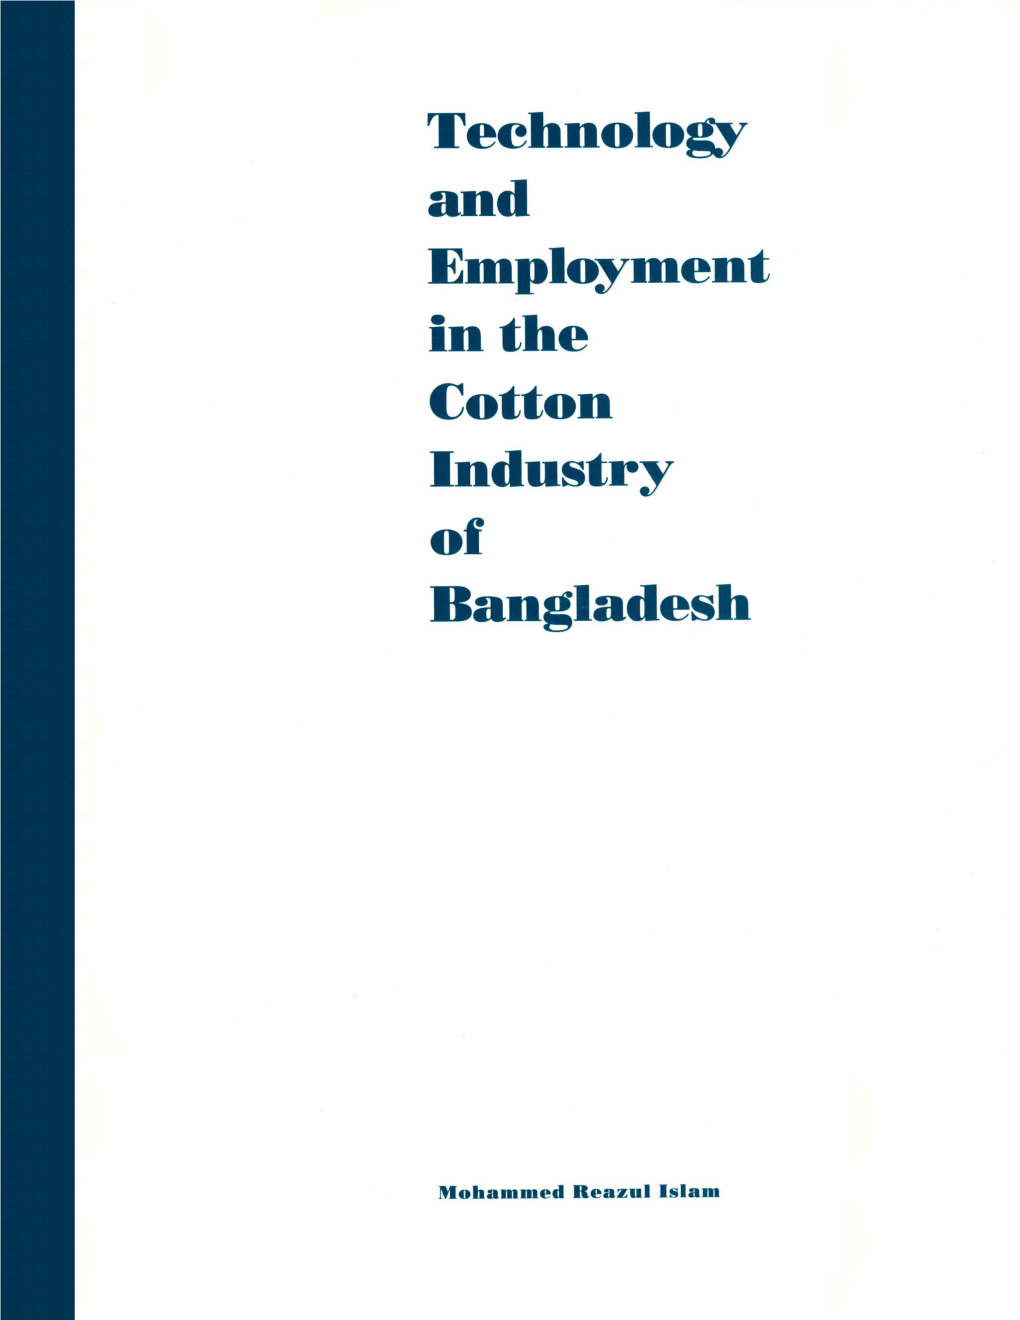 Technology and Employment in the Cotton Industry of Bangladesh December 1992